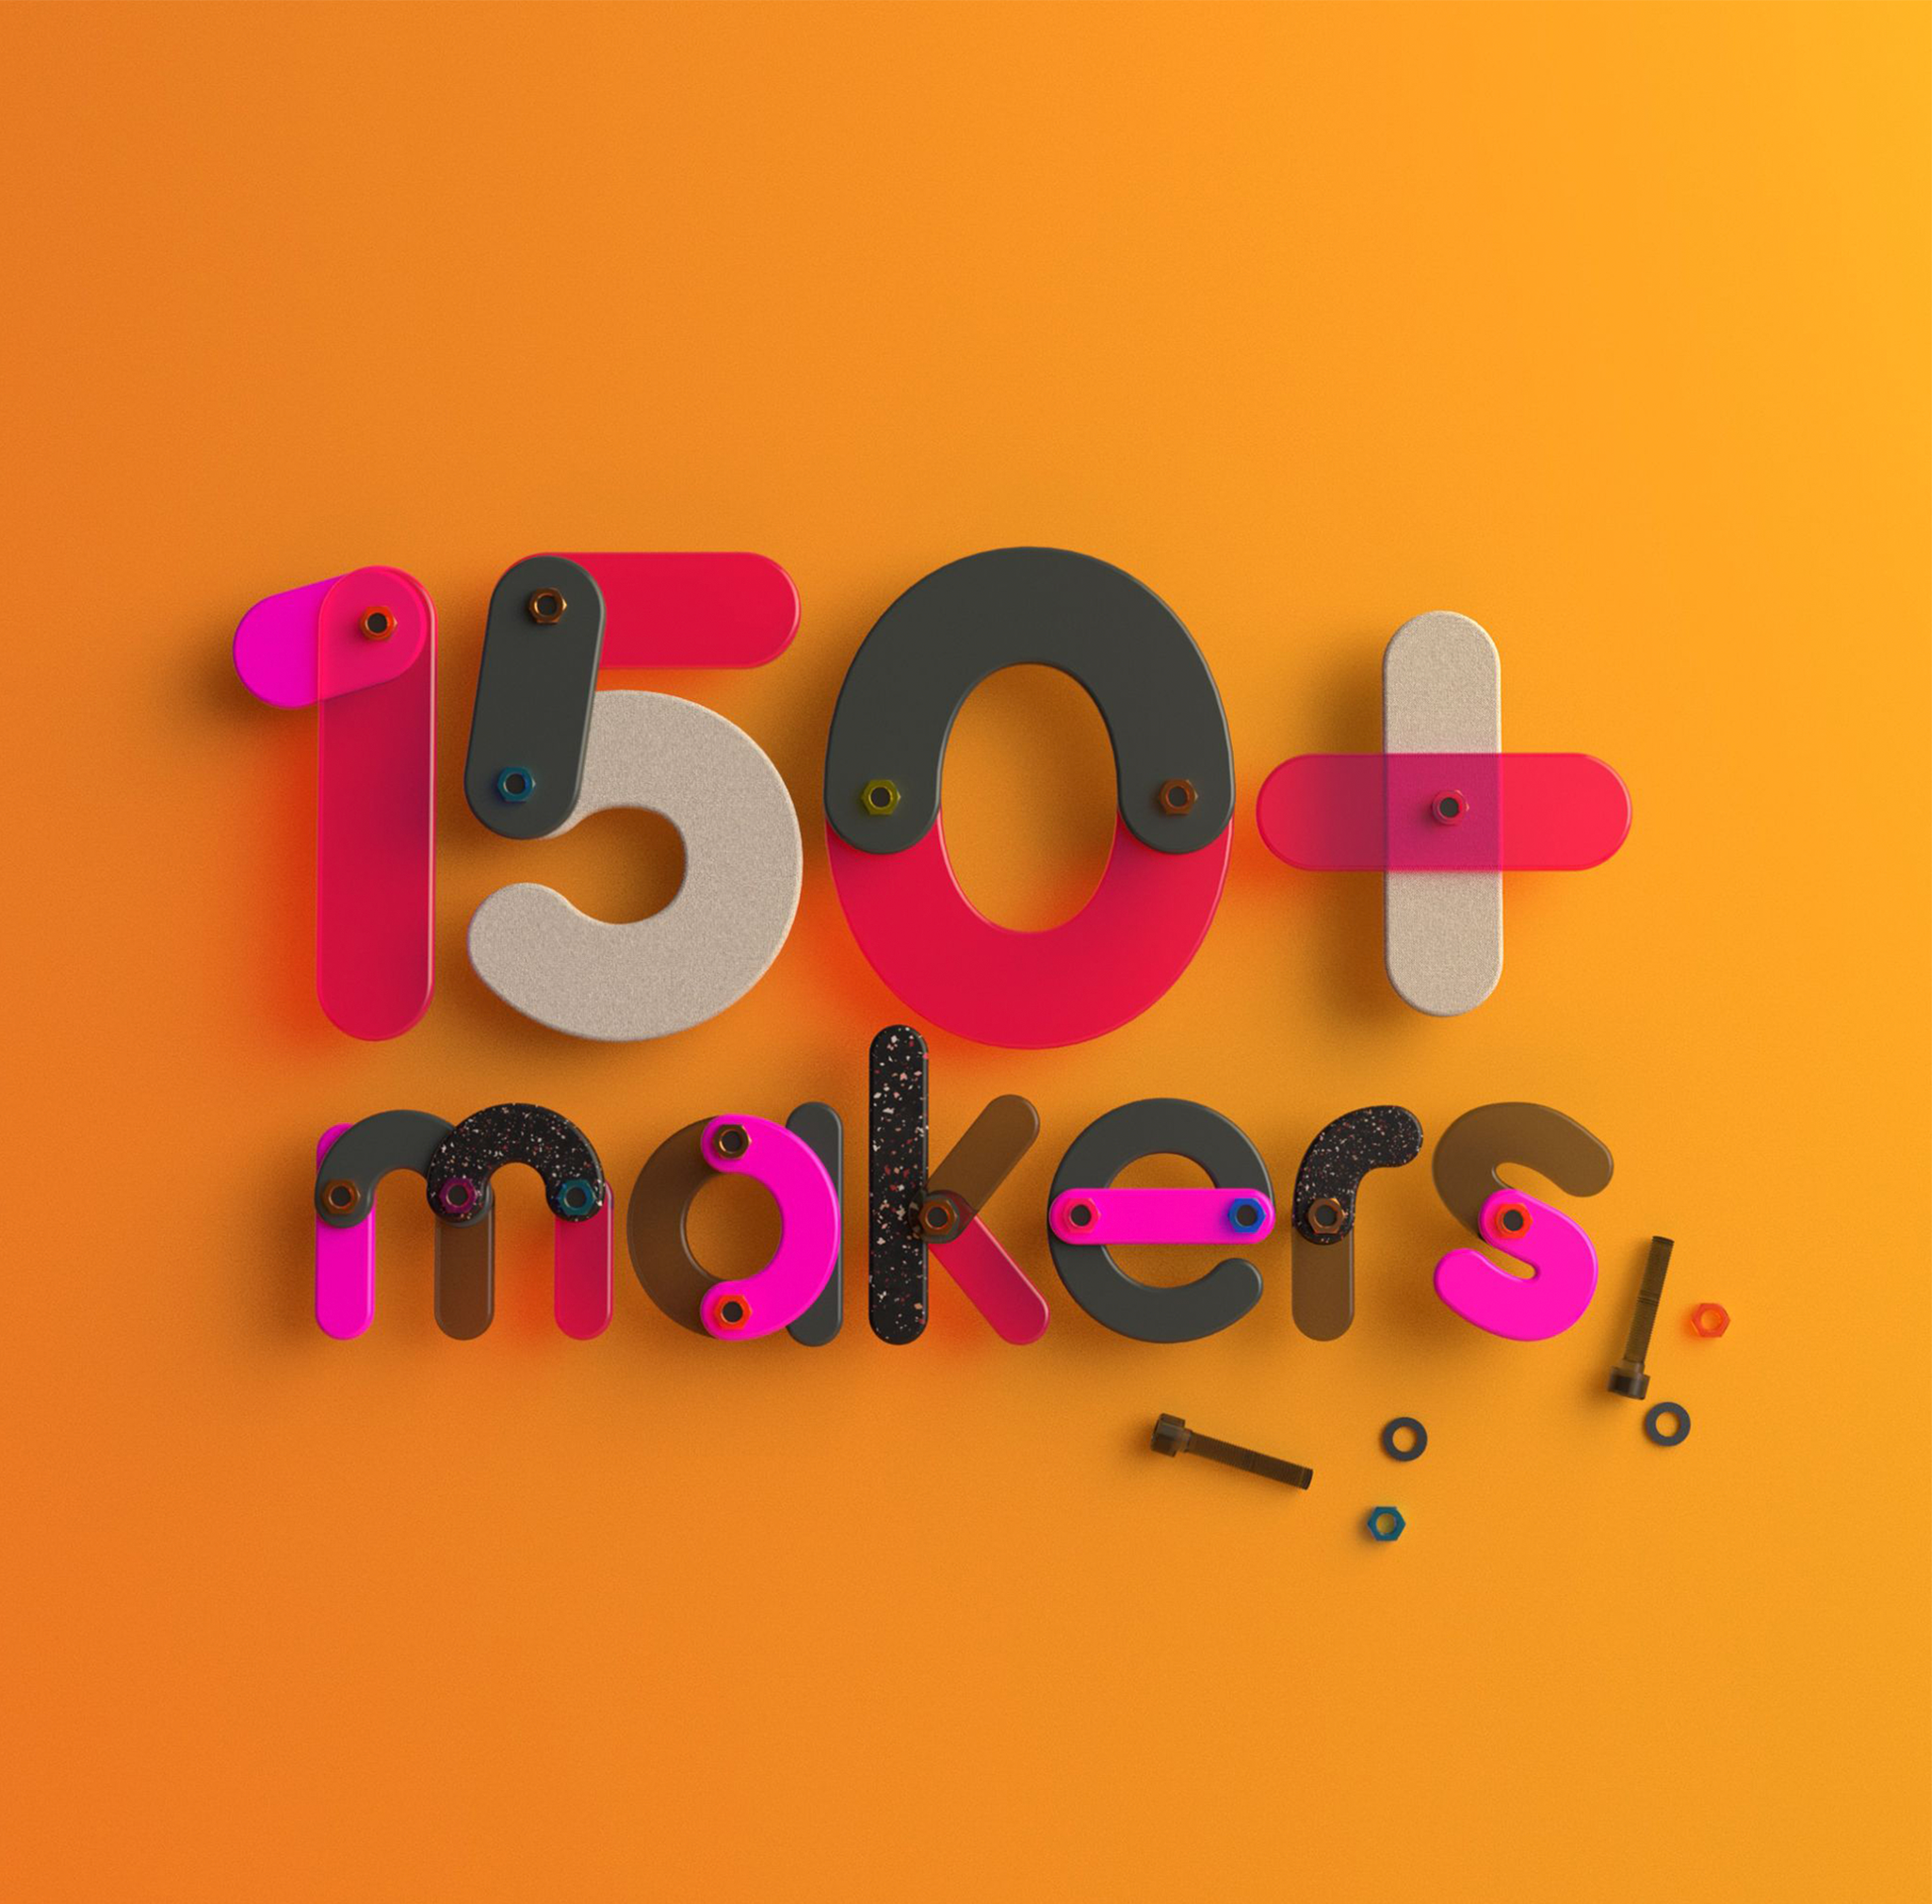 150-makers